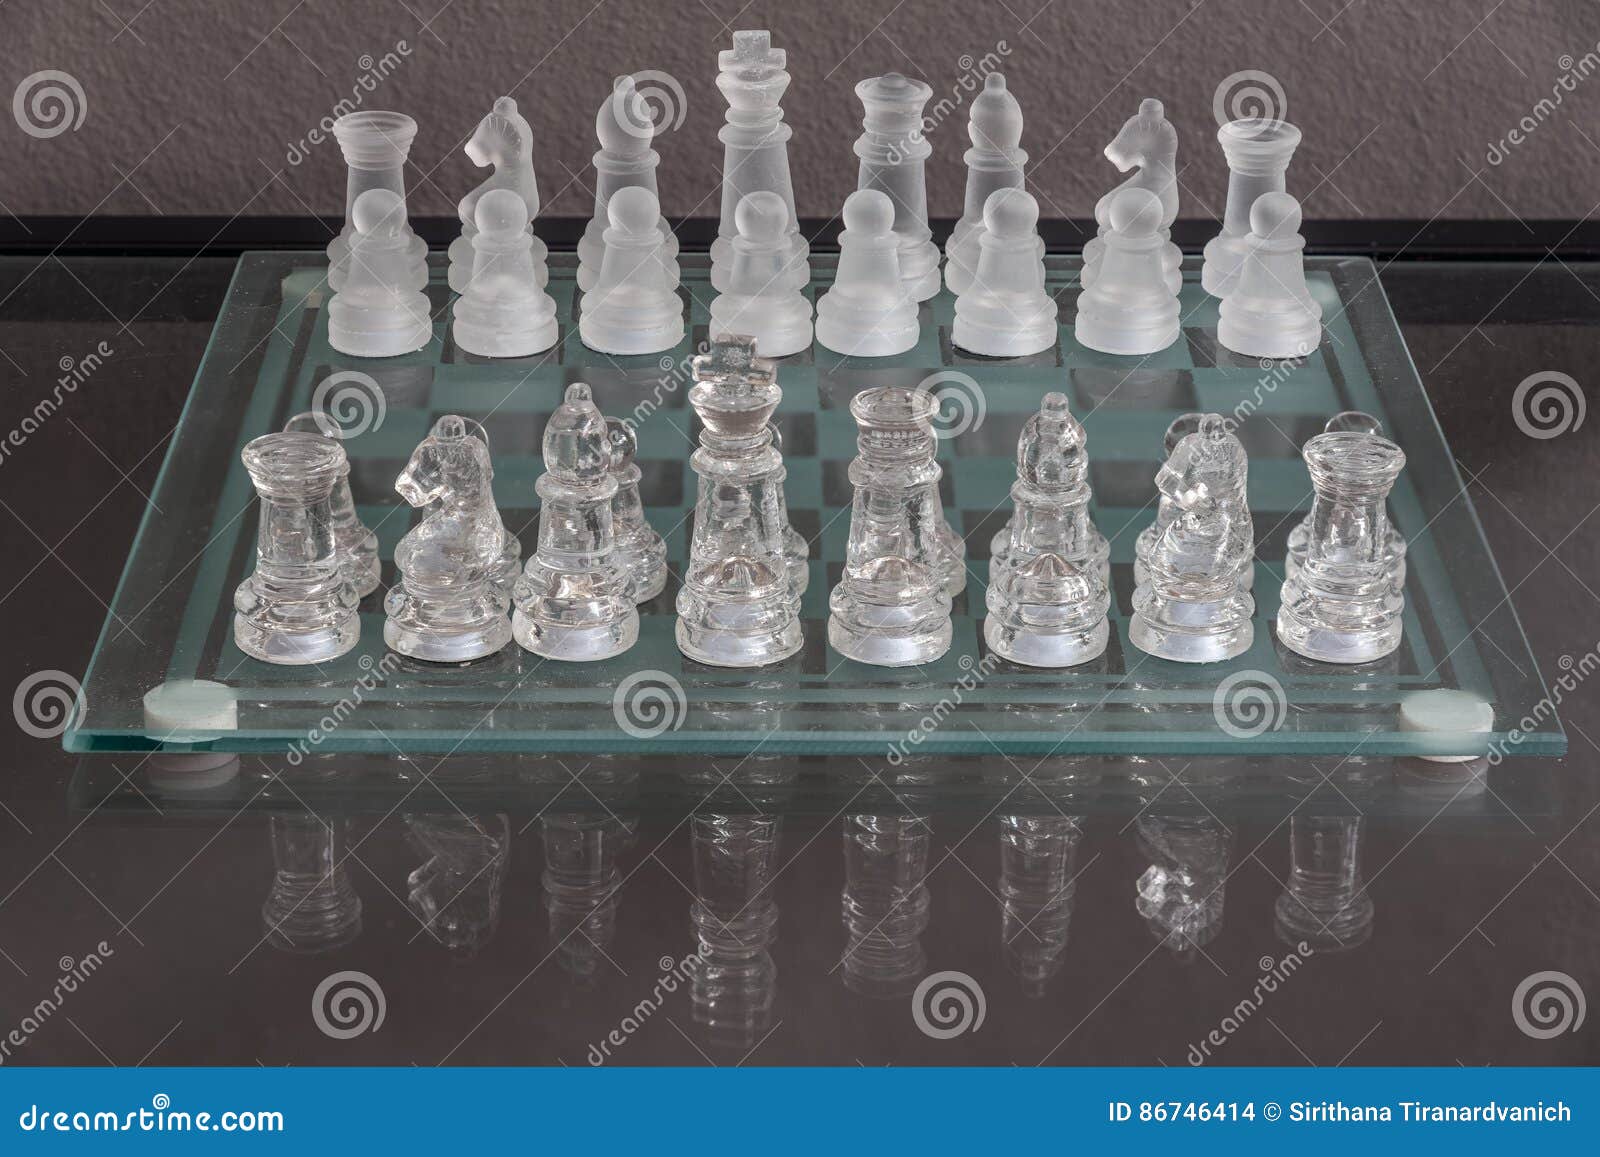 How To Set Up a Chess Board? - Chess Setup